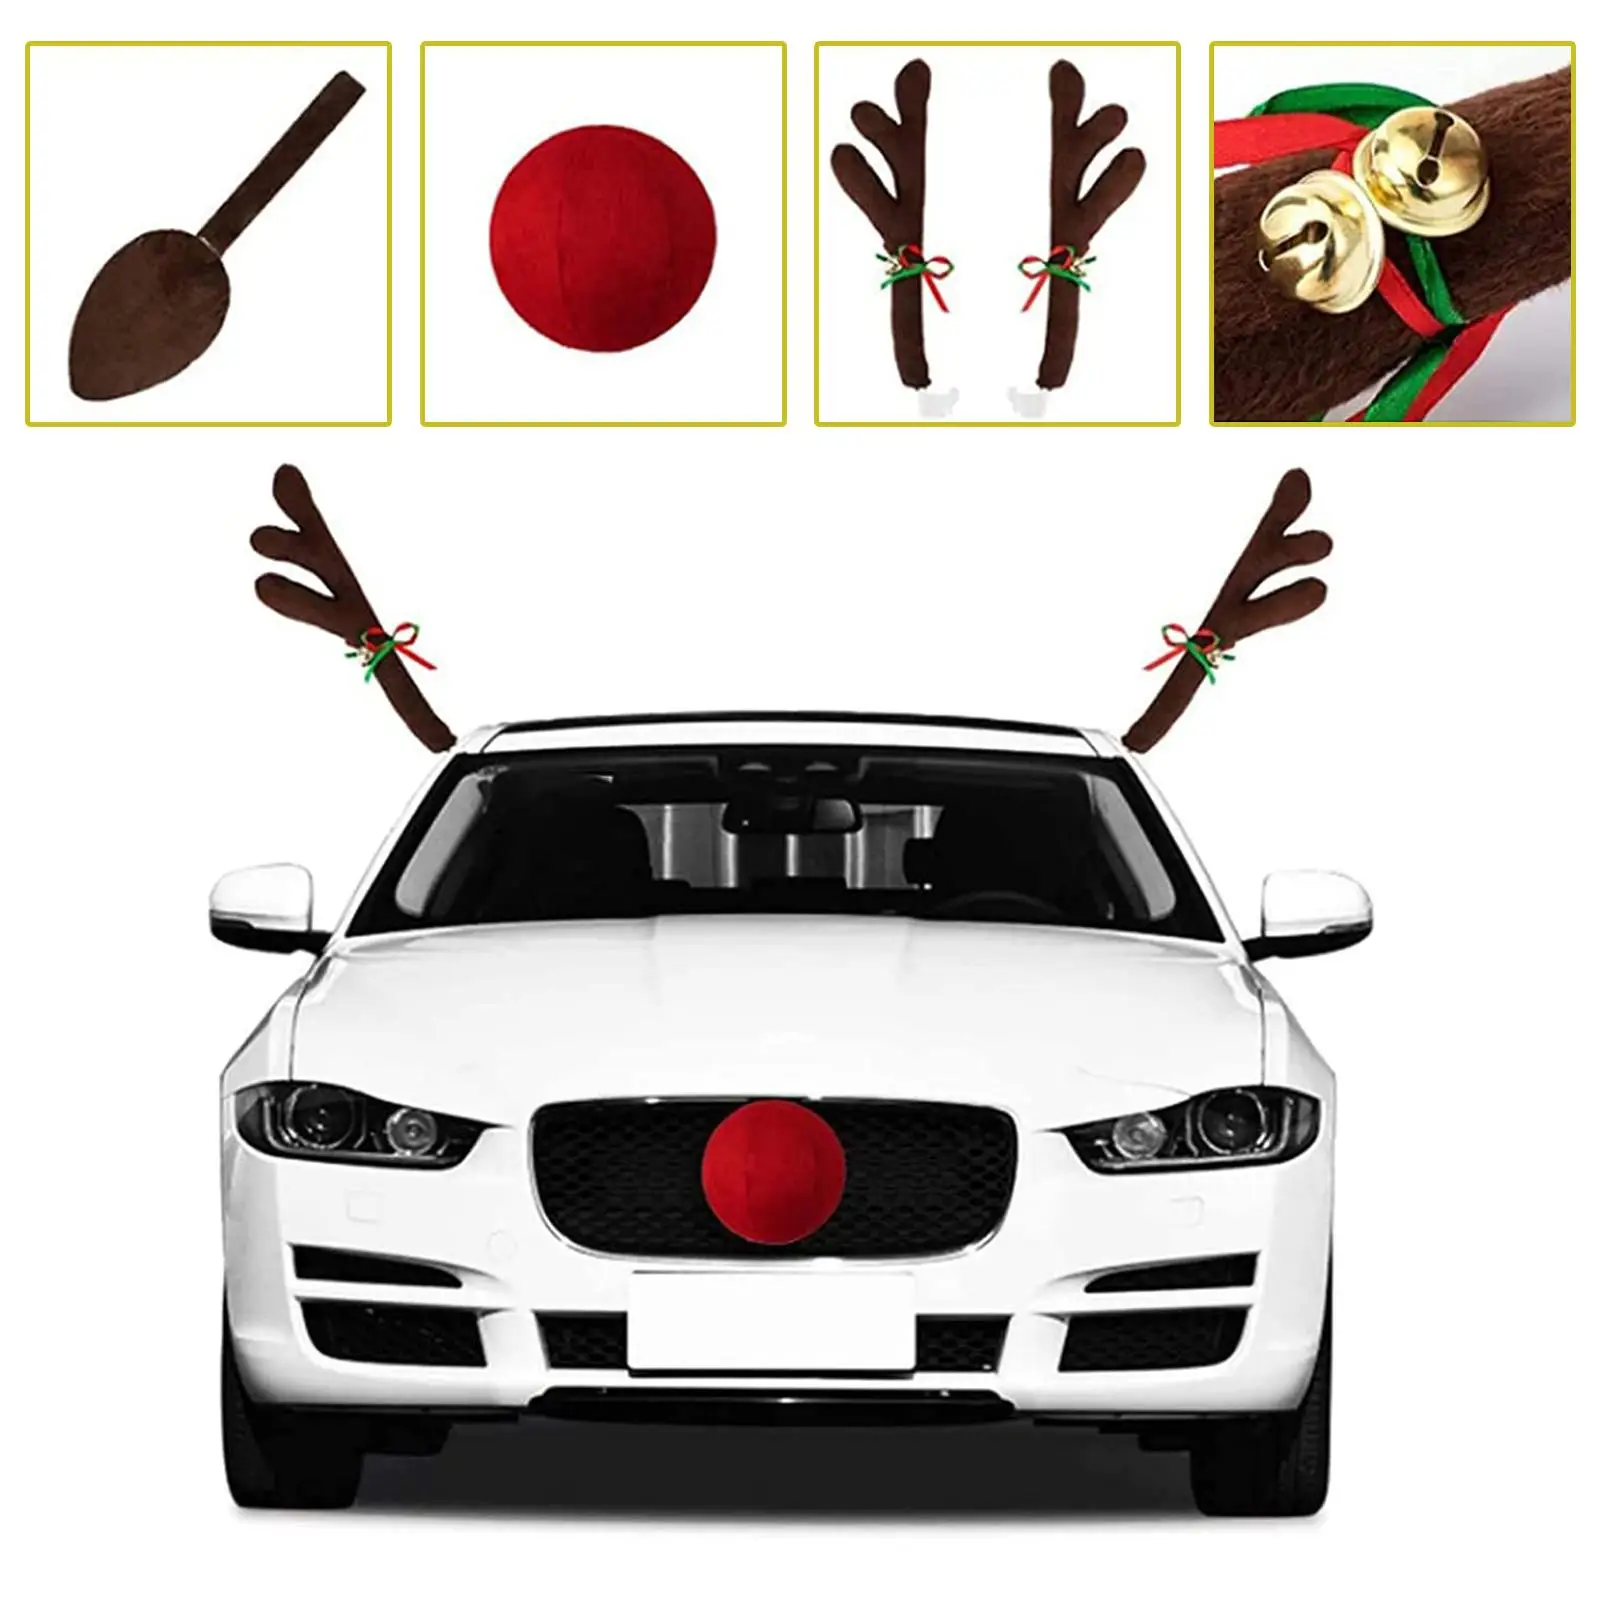 Car Reindeer Christmas Decoration Antlers & Nose Party Accessory Easy Installation Car Costume Auto Accessories for SUV Van